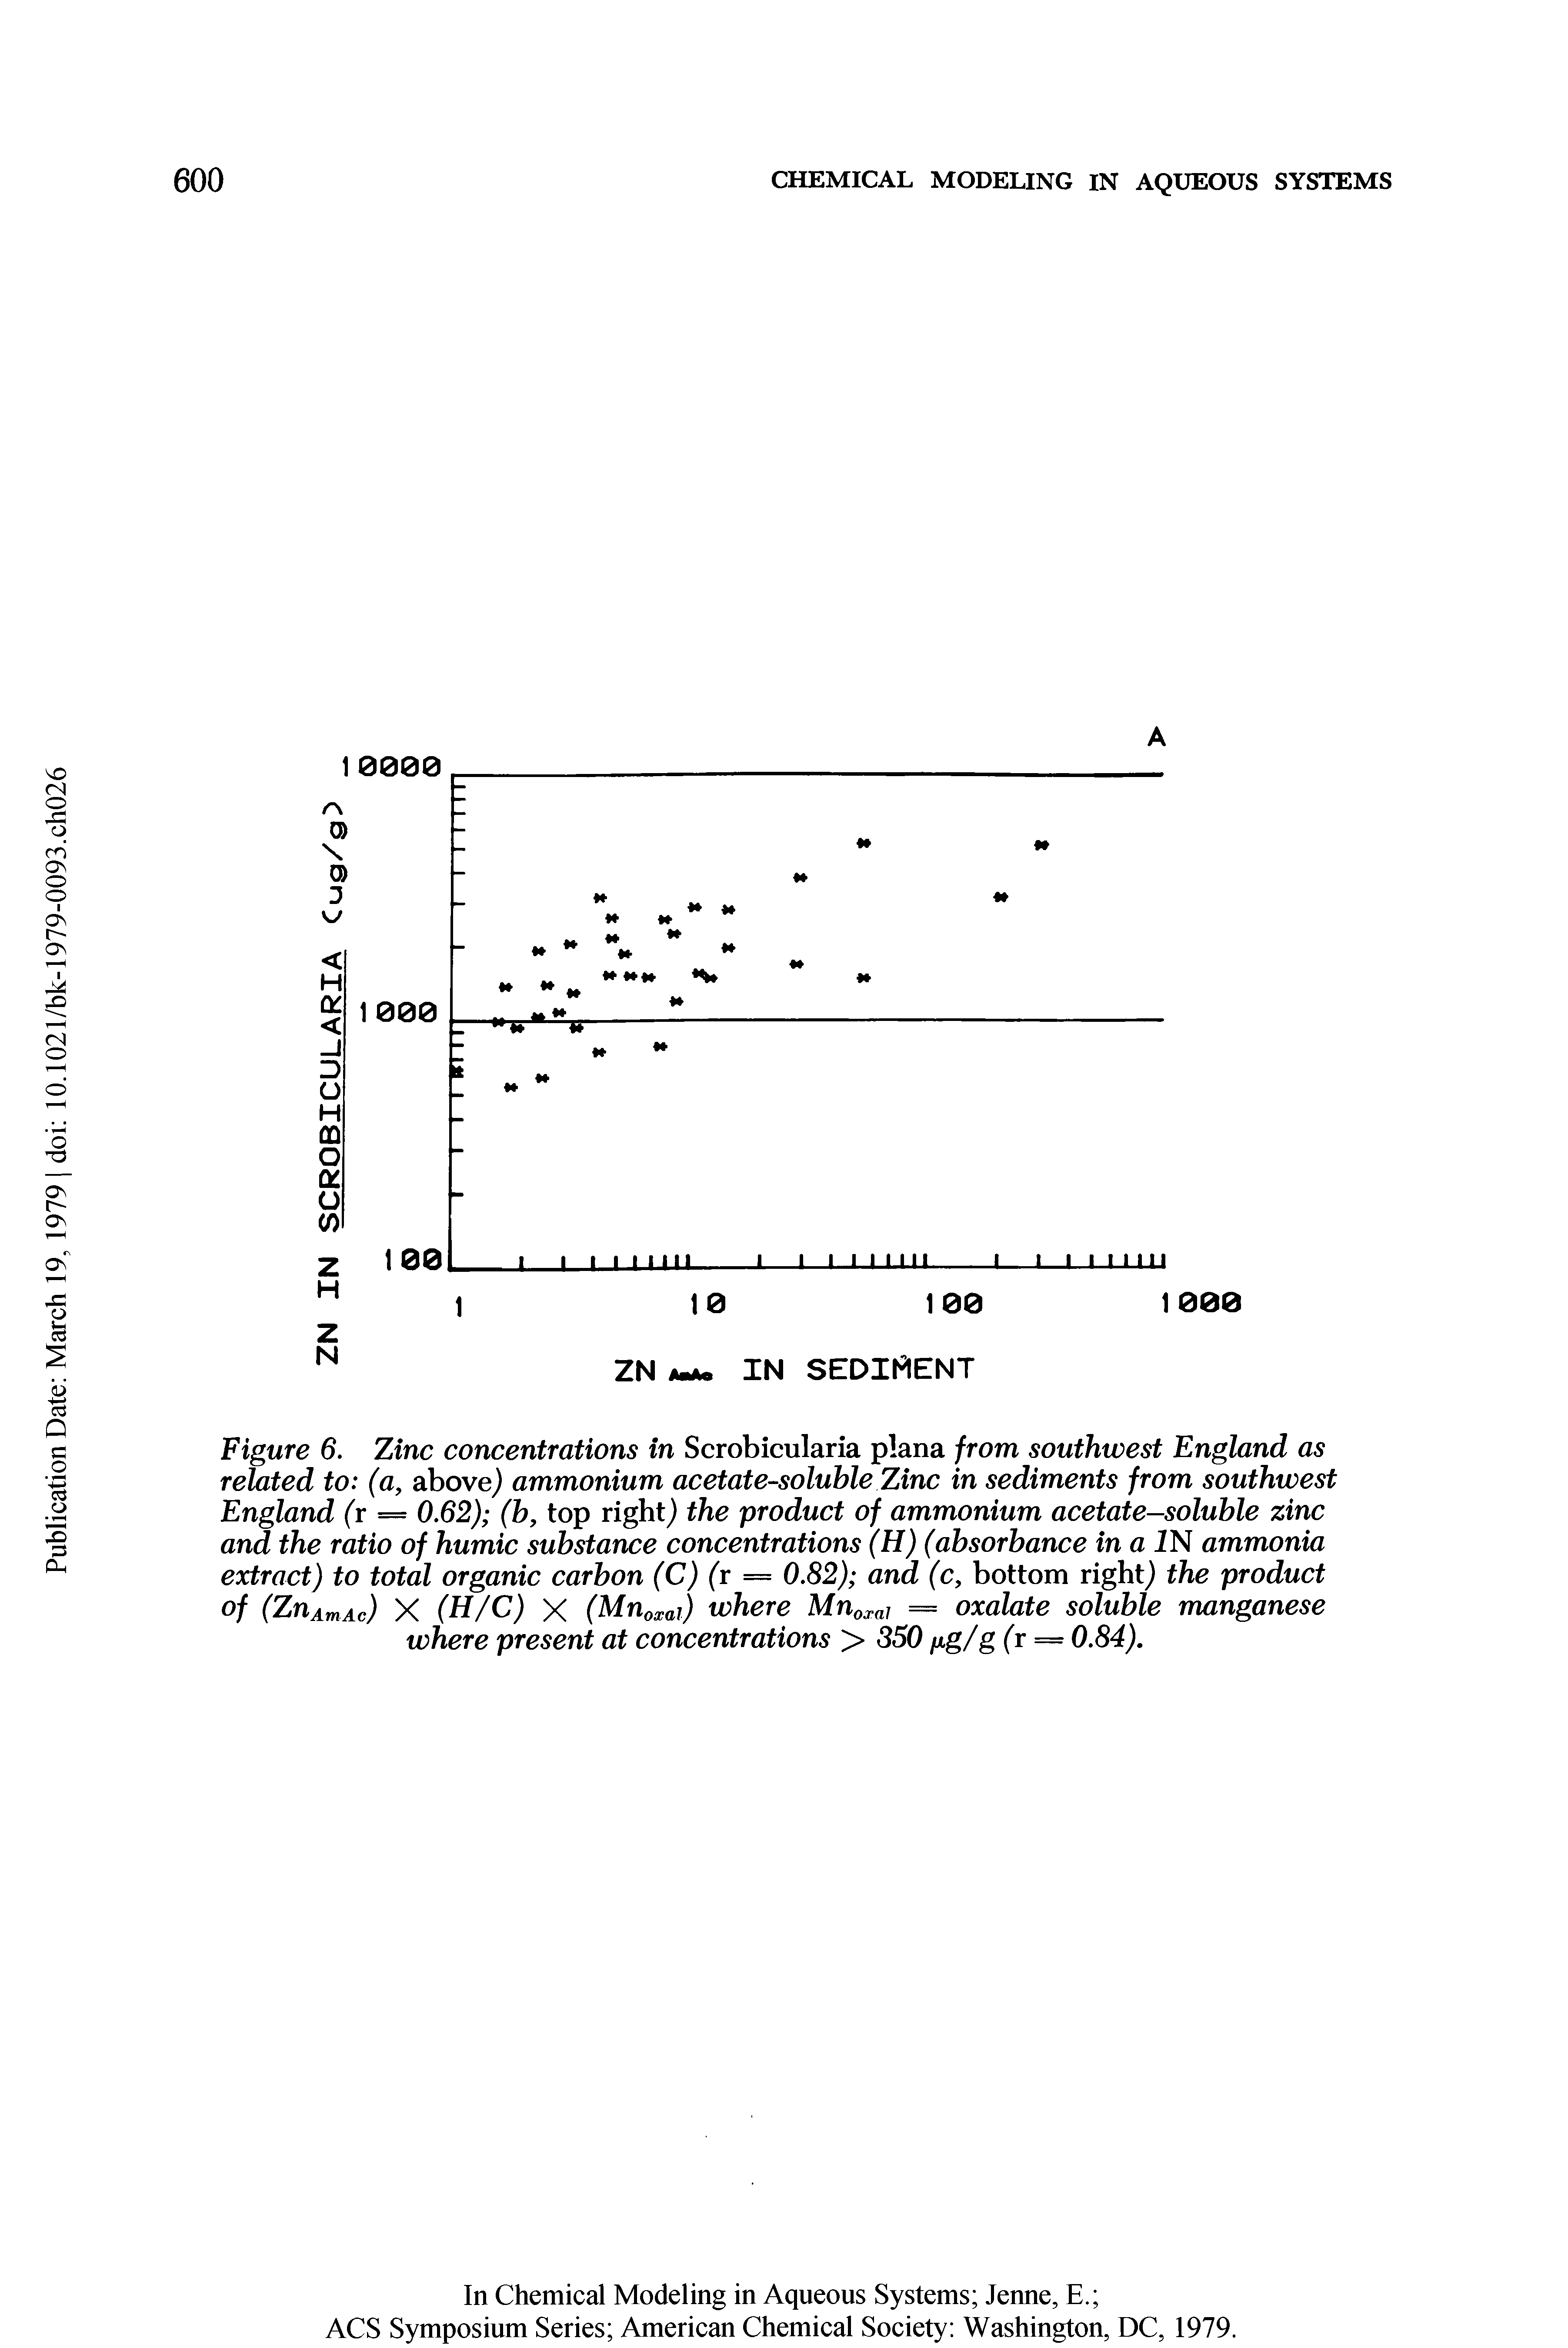 Figure 6. Zinc concentrations in Scrobicularia plana from southwest England as related to (a, above) ammonium acetate-soluble Zinc in sediments from southwest England (r = 0.62) (h, top right) the product of ammonium acetate-soluble zinc and the ratio of humic substance concentrations (H) (absorbance in a IN ammonia extract) to total organic carbon (C) (r = 0.82) and (c, bottom right) the product of (ZnAmAc) X (H/C) X (Muoxai) whcrc Muoxai = oxalate soluble manganese where present at concentrations > 350 ixg/g (r = 0.84).